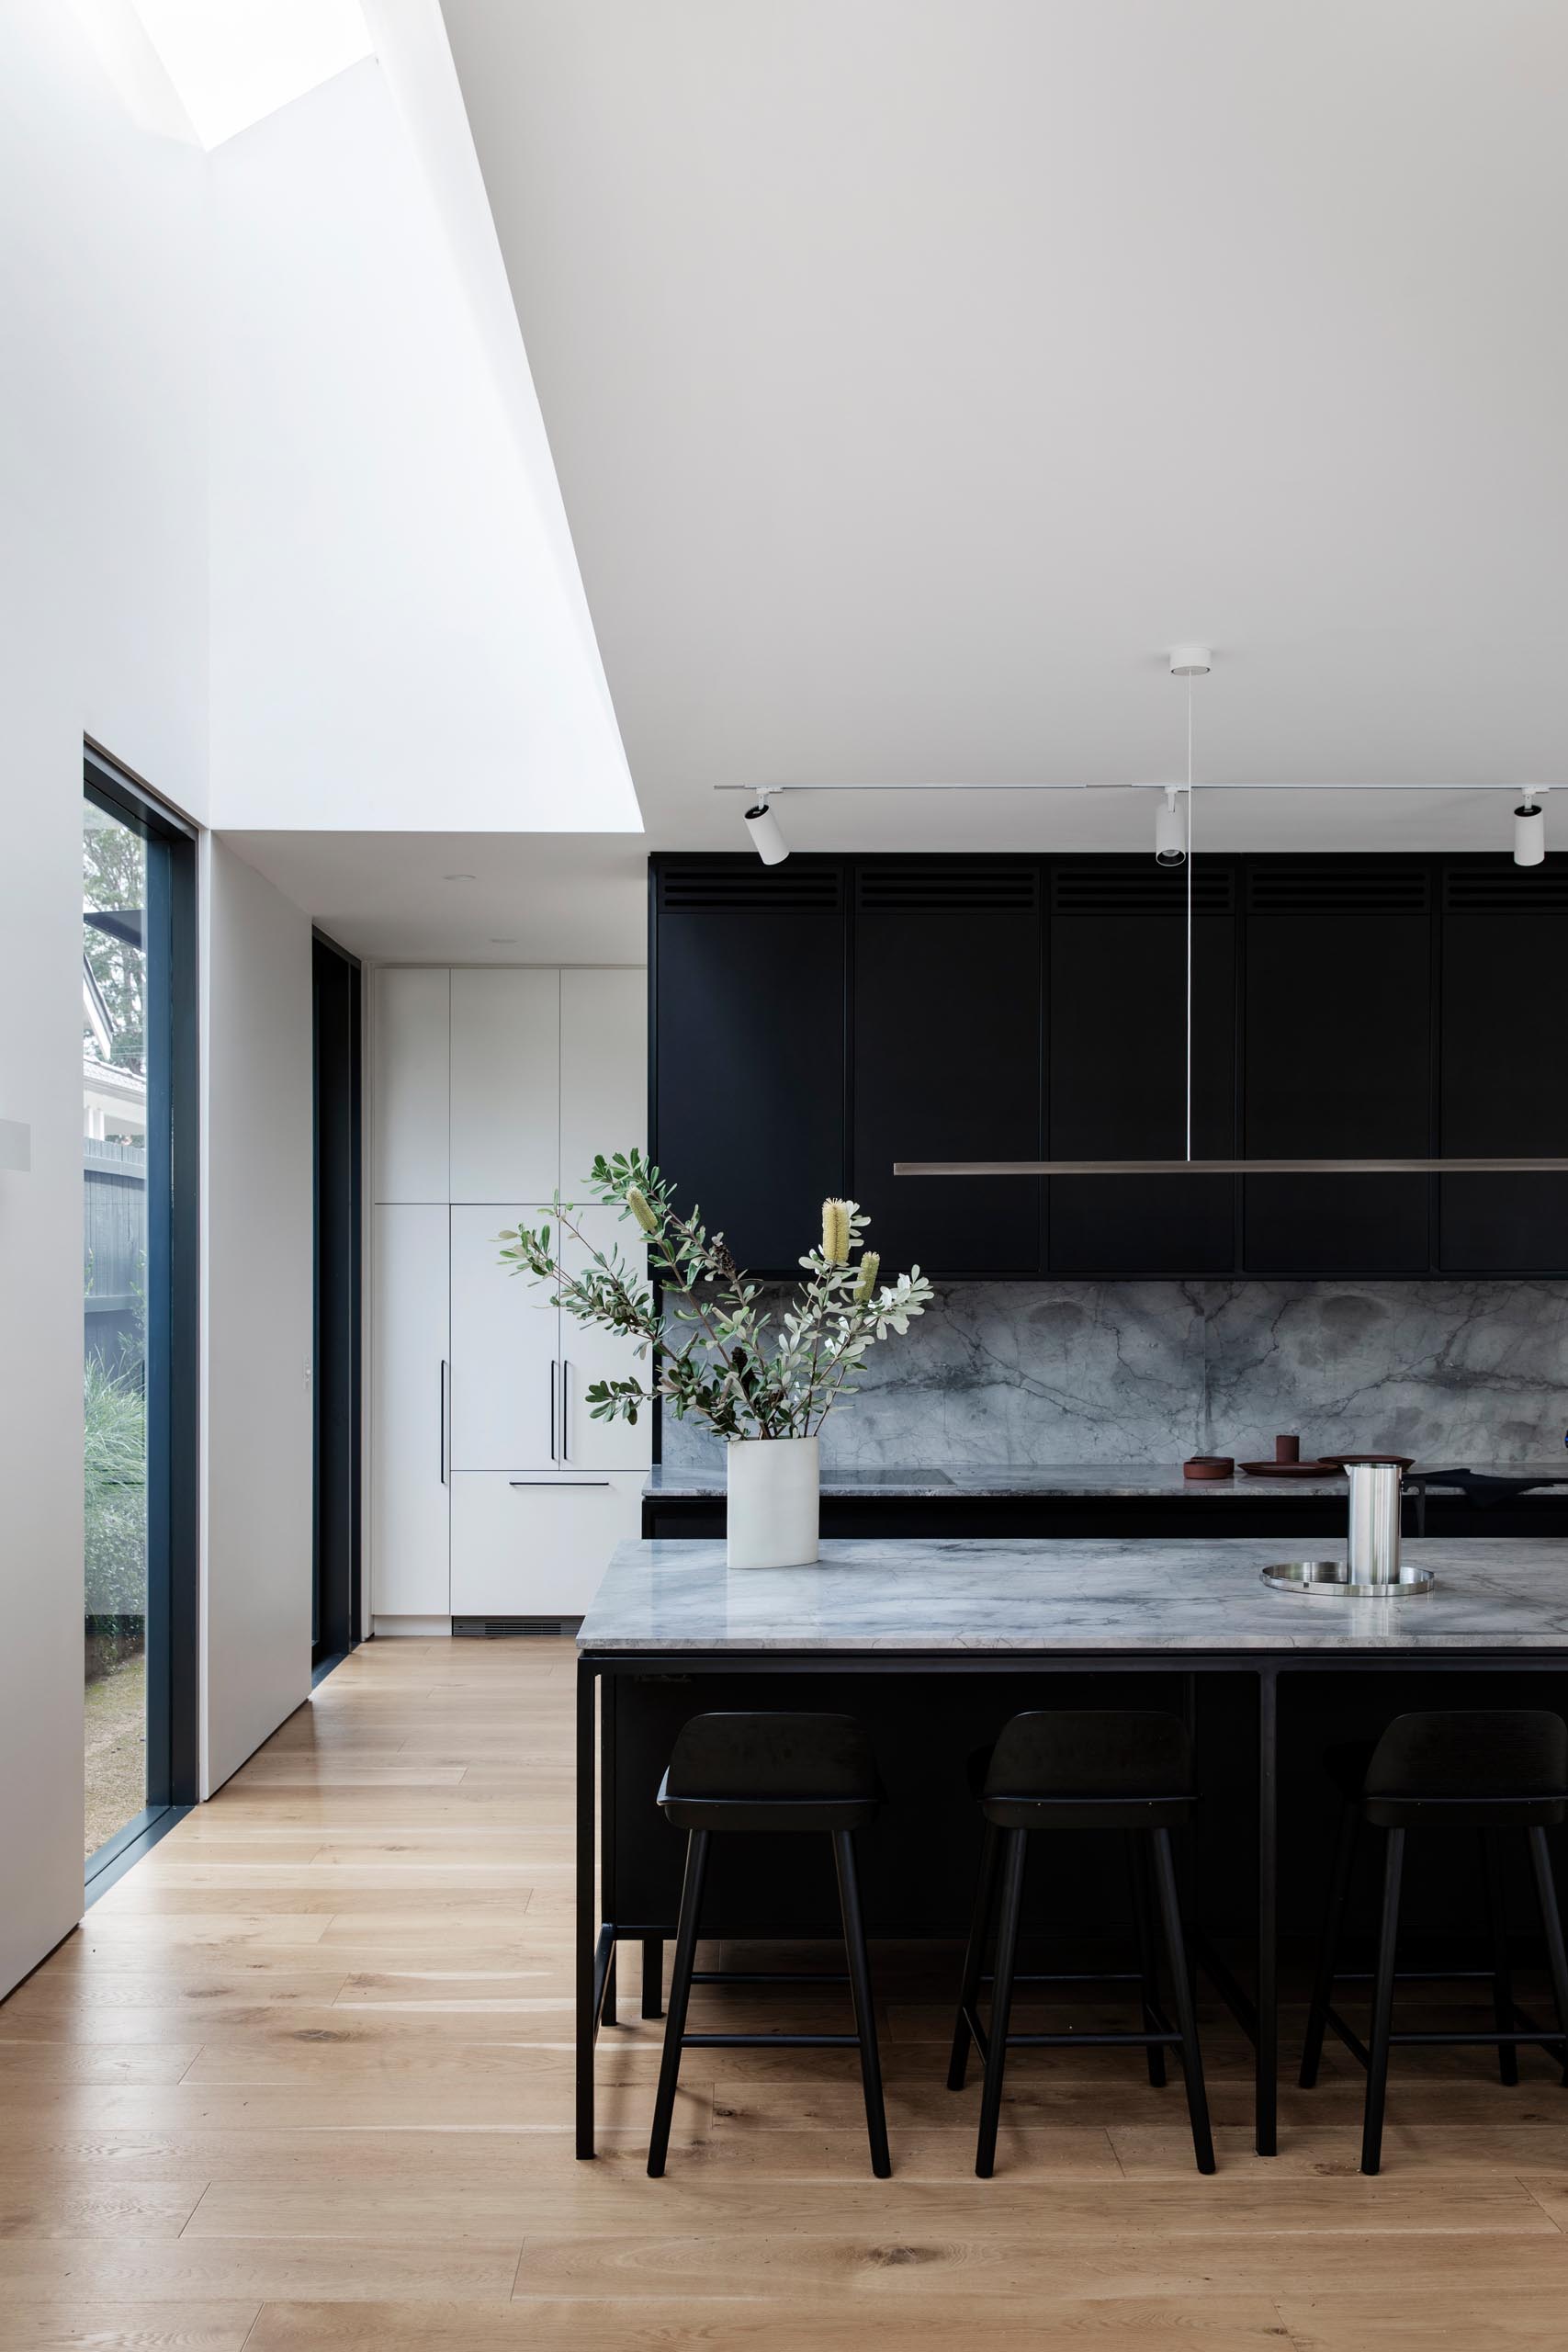 A modern kitchen has a simple color palette with matte black cabinets that are made from Paperock, a sustainable building material combining condensed layers of renewable paper bonded with resin. Grey marble, black hardware, and a minimalist horizontal light fixture complete the look.